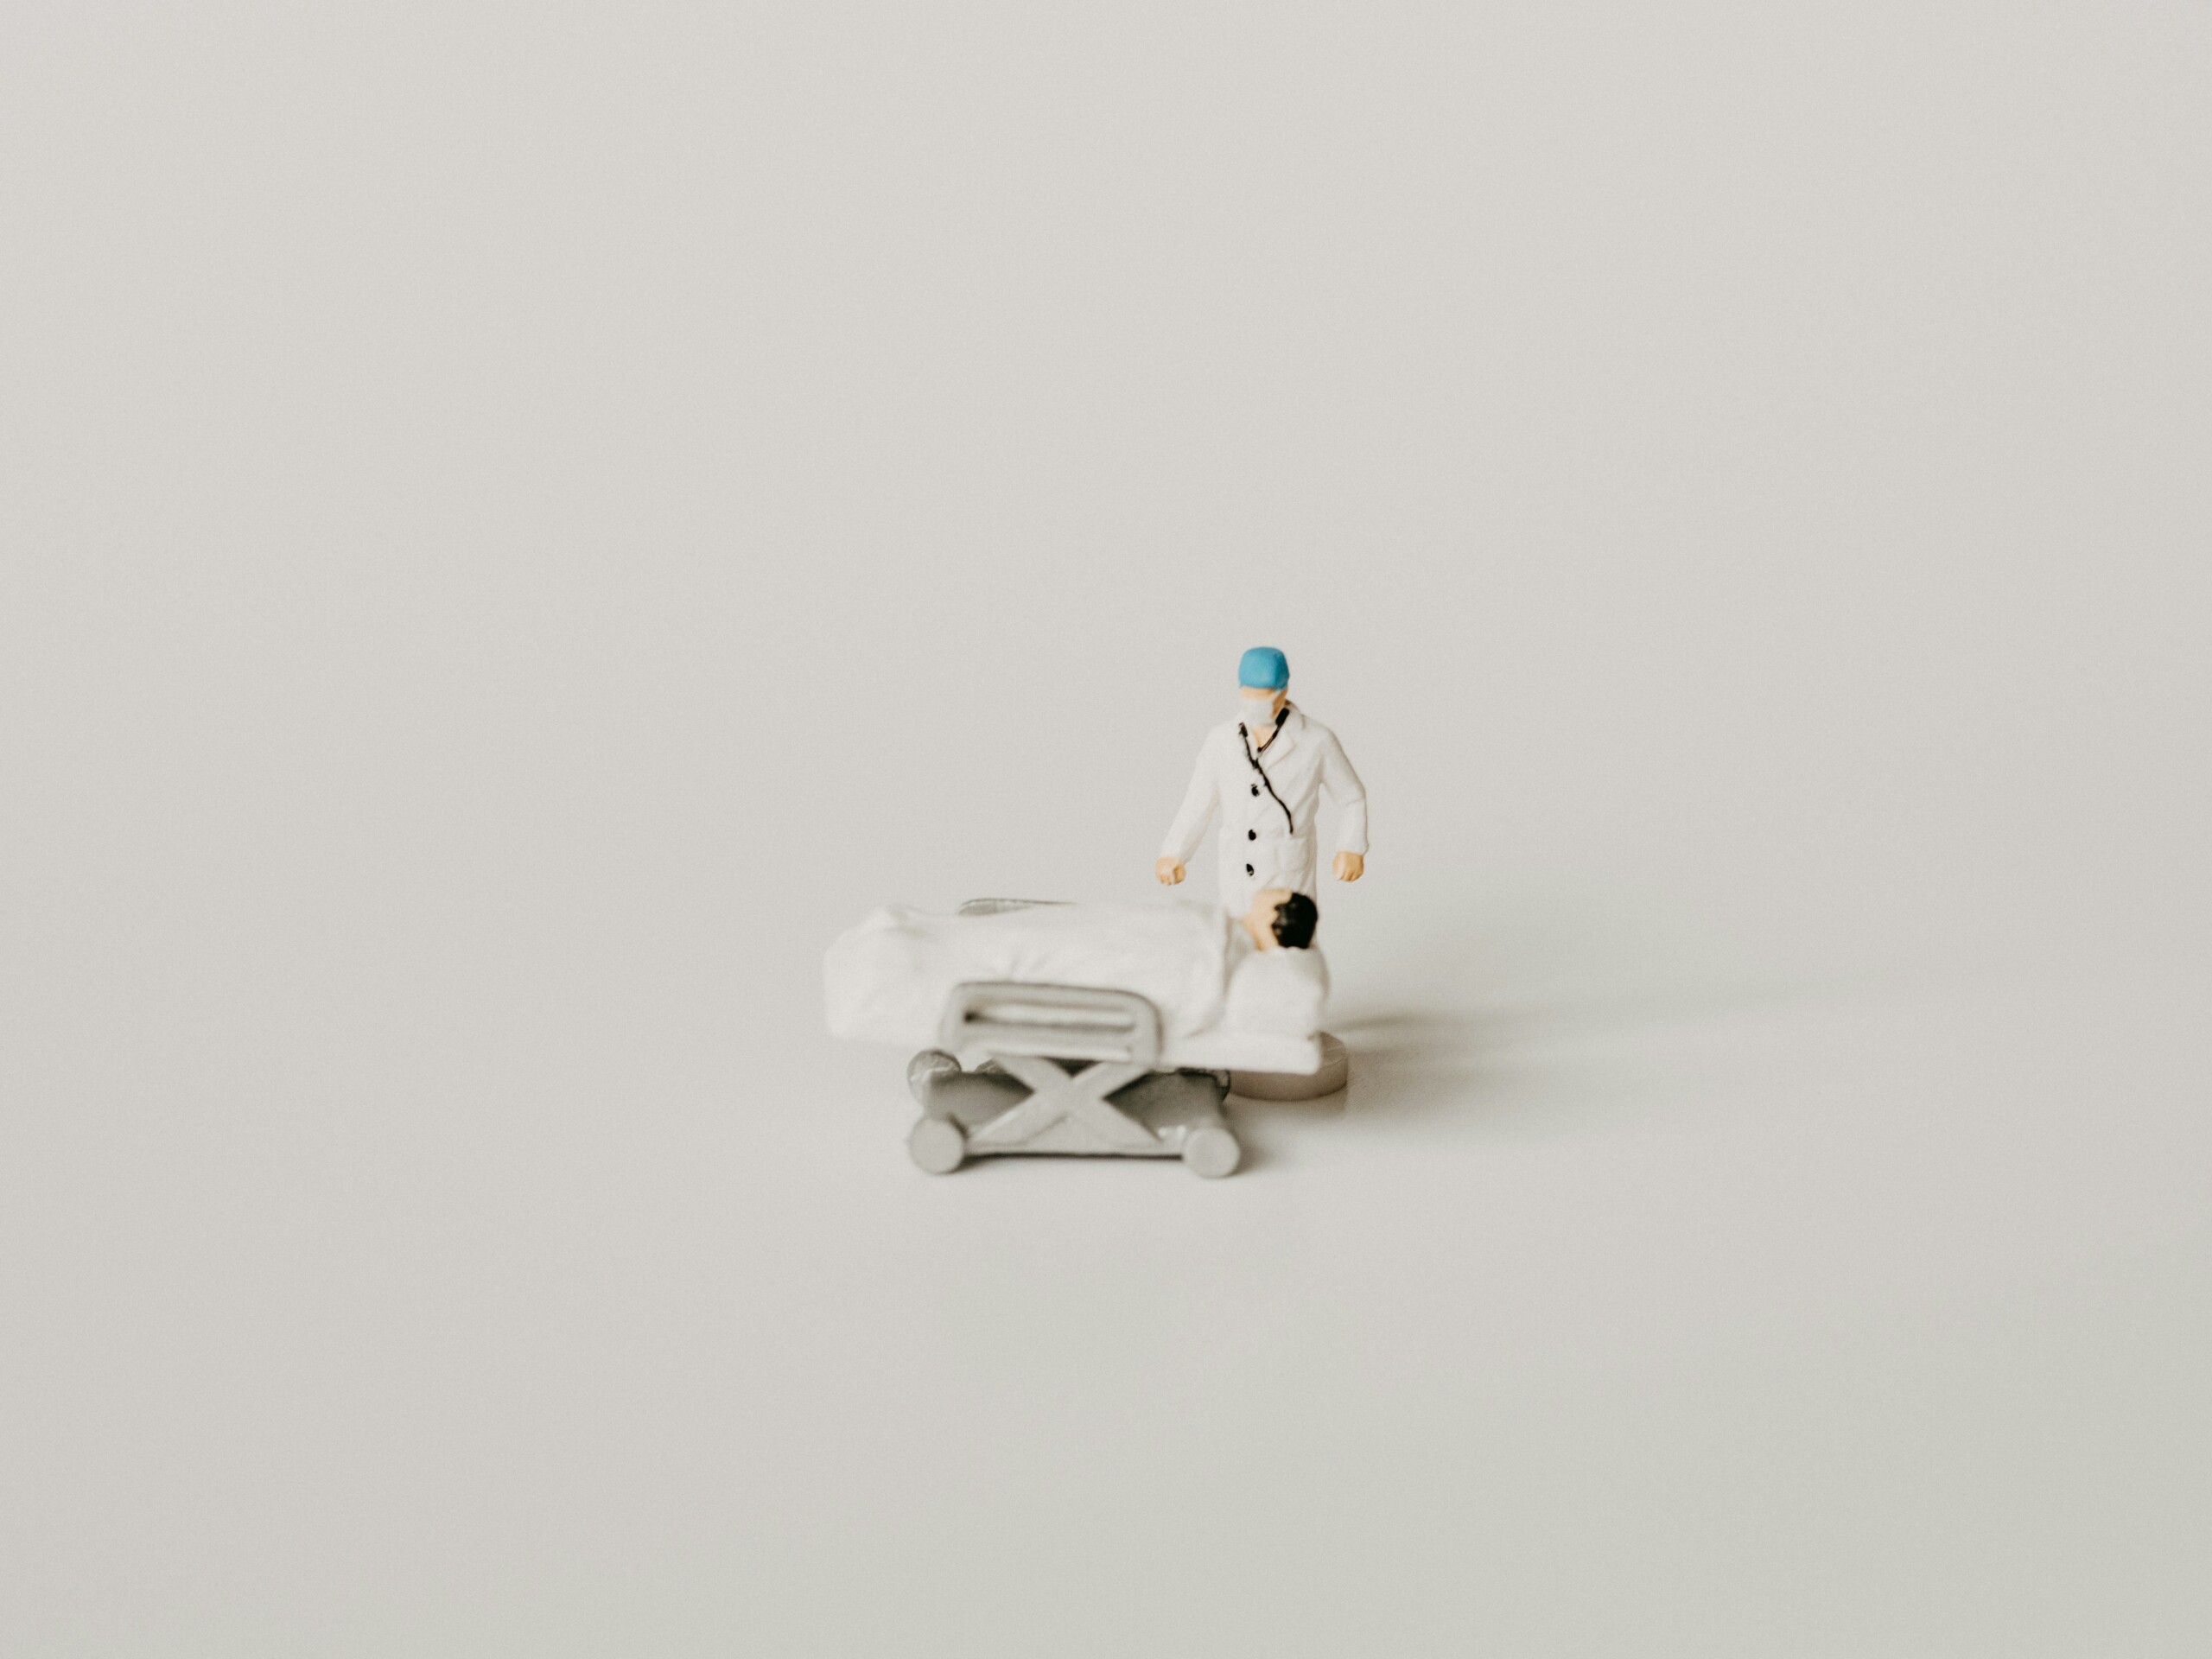 a model of a miniature doctor and patient on a gurney